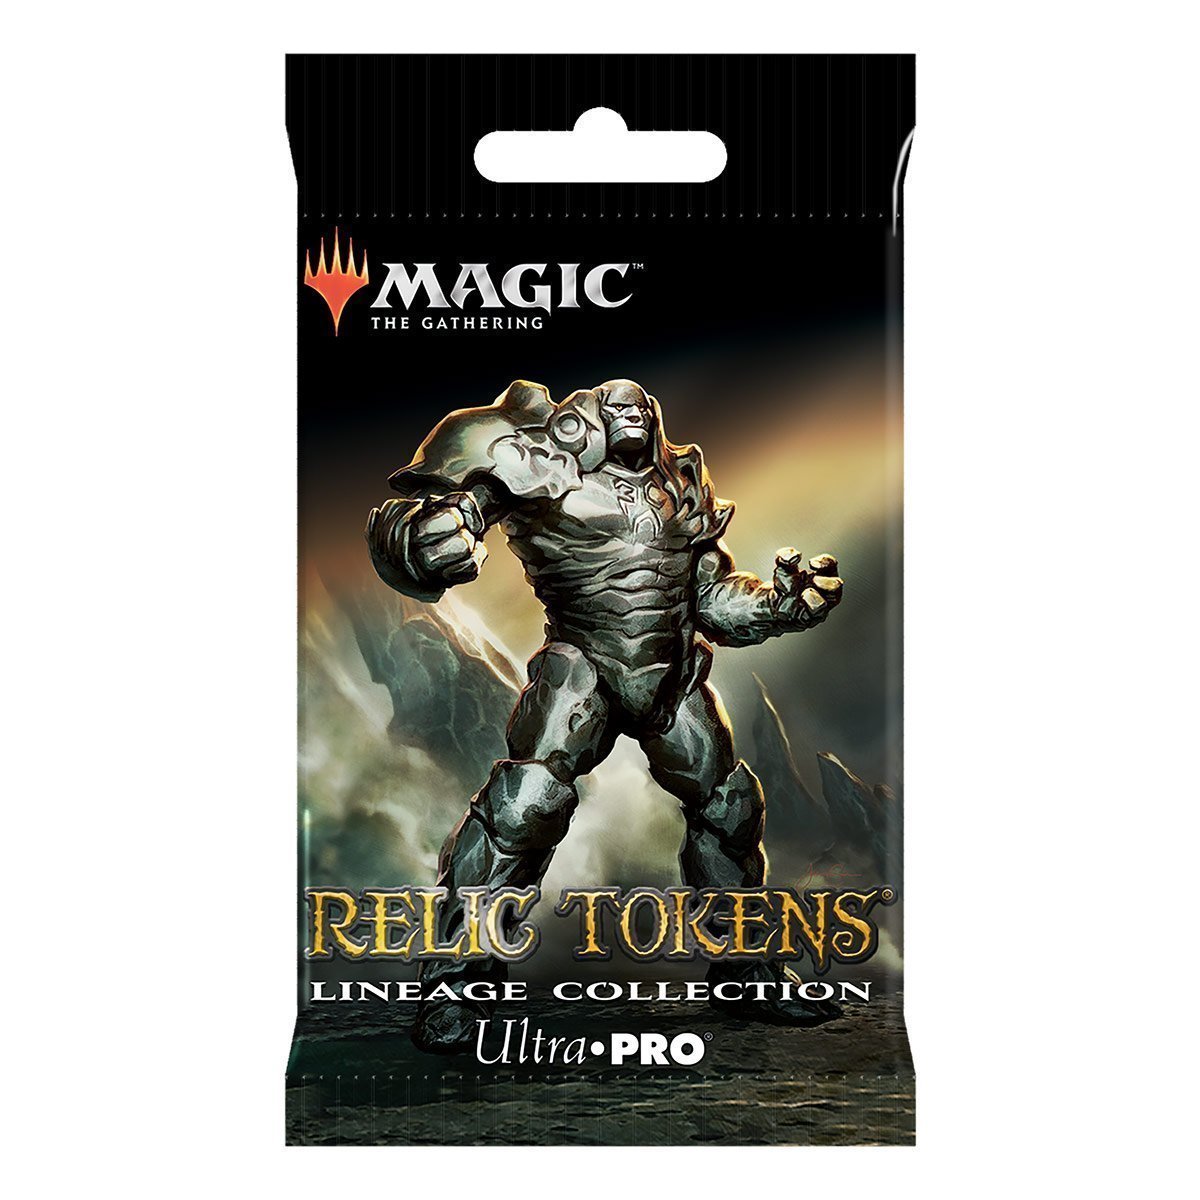 Relic Tokens Lineage Collection (24pz)